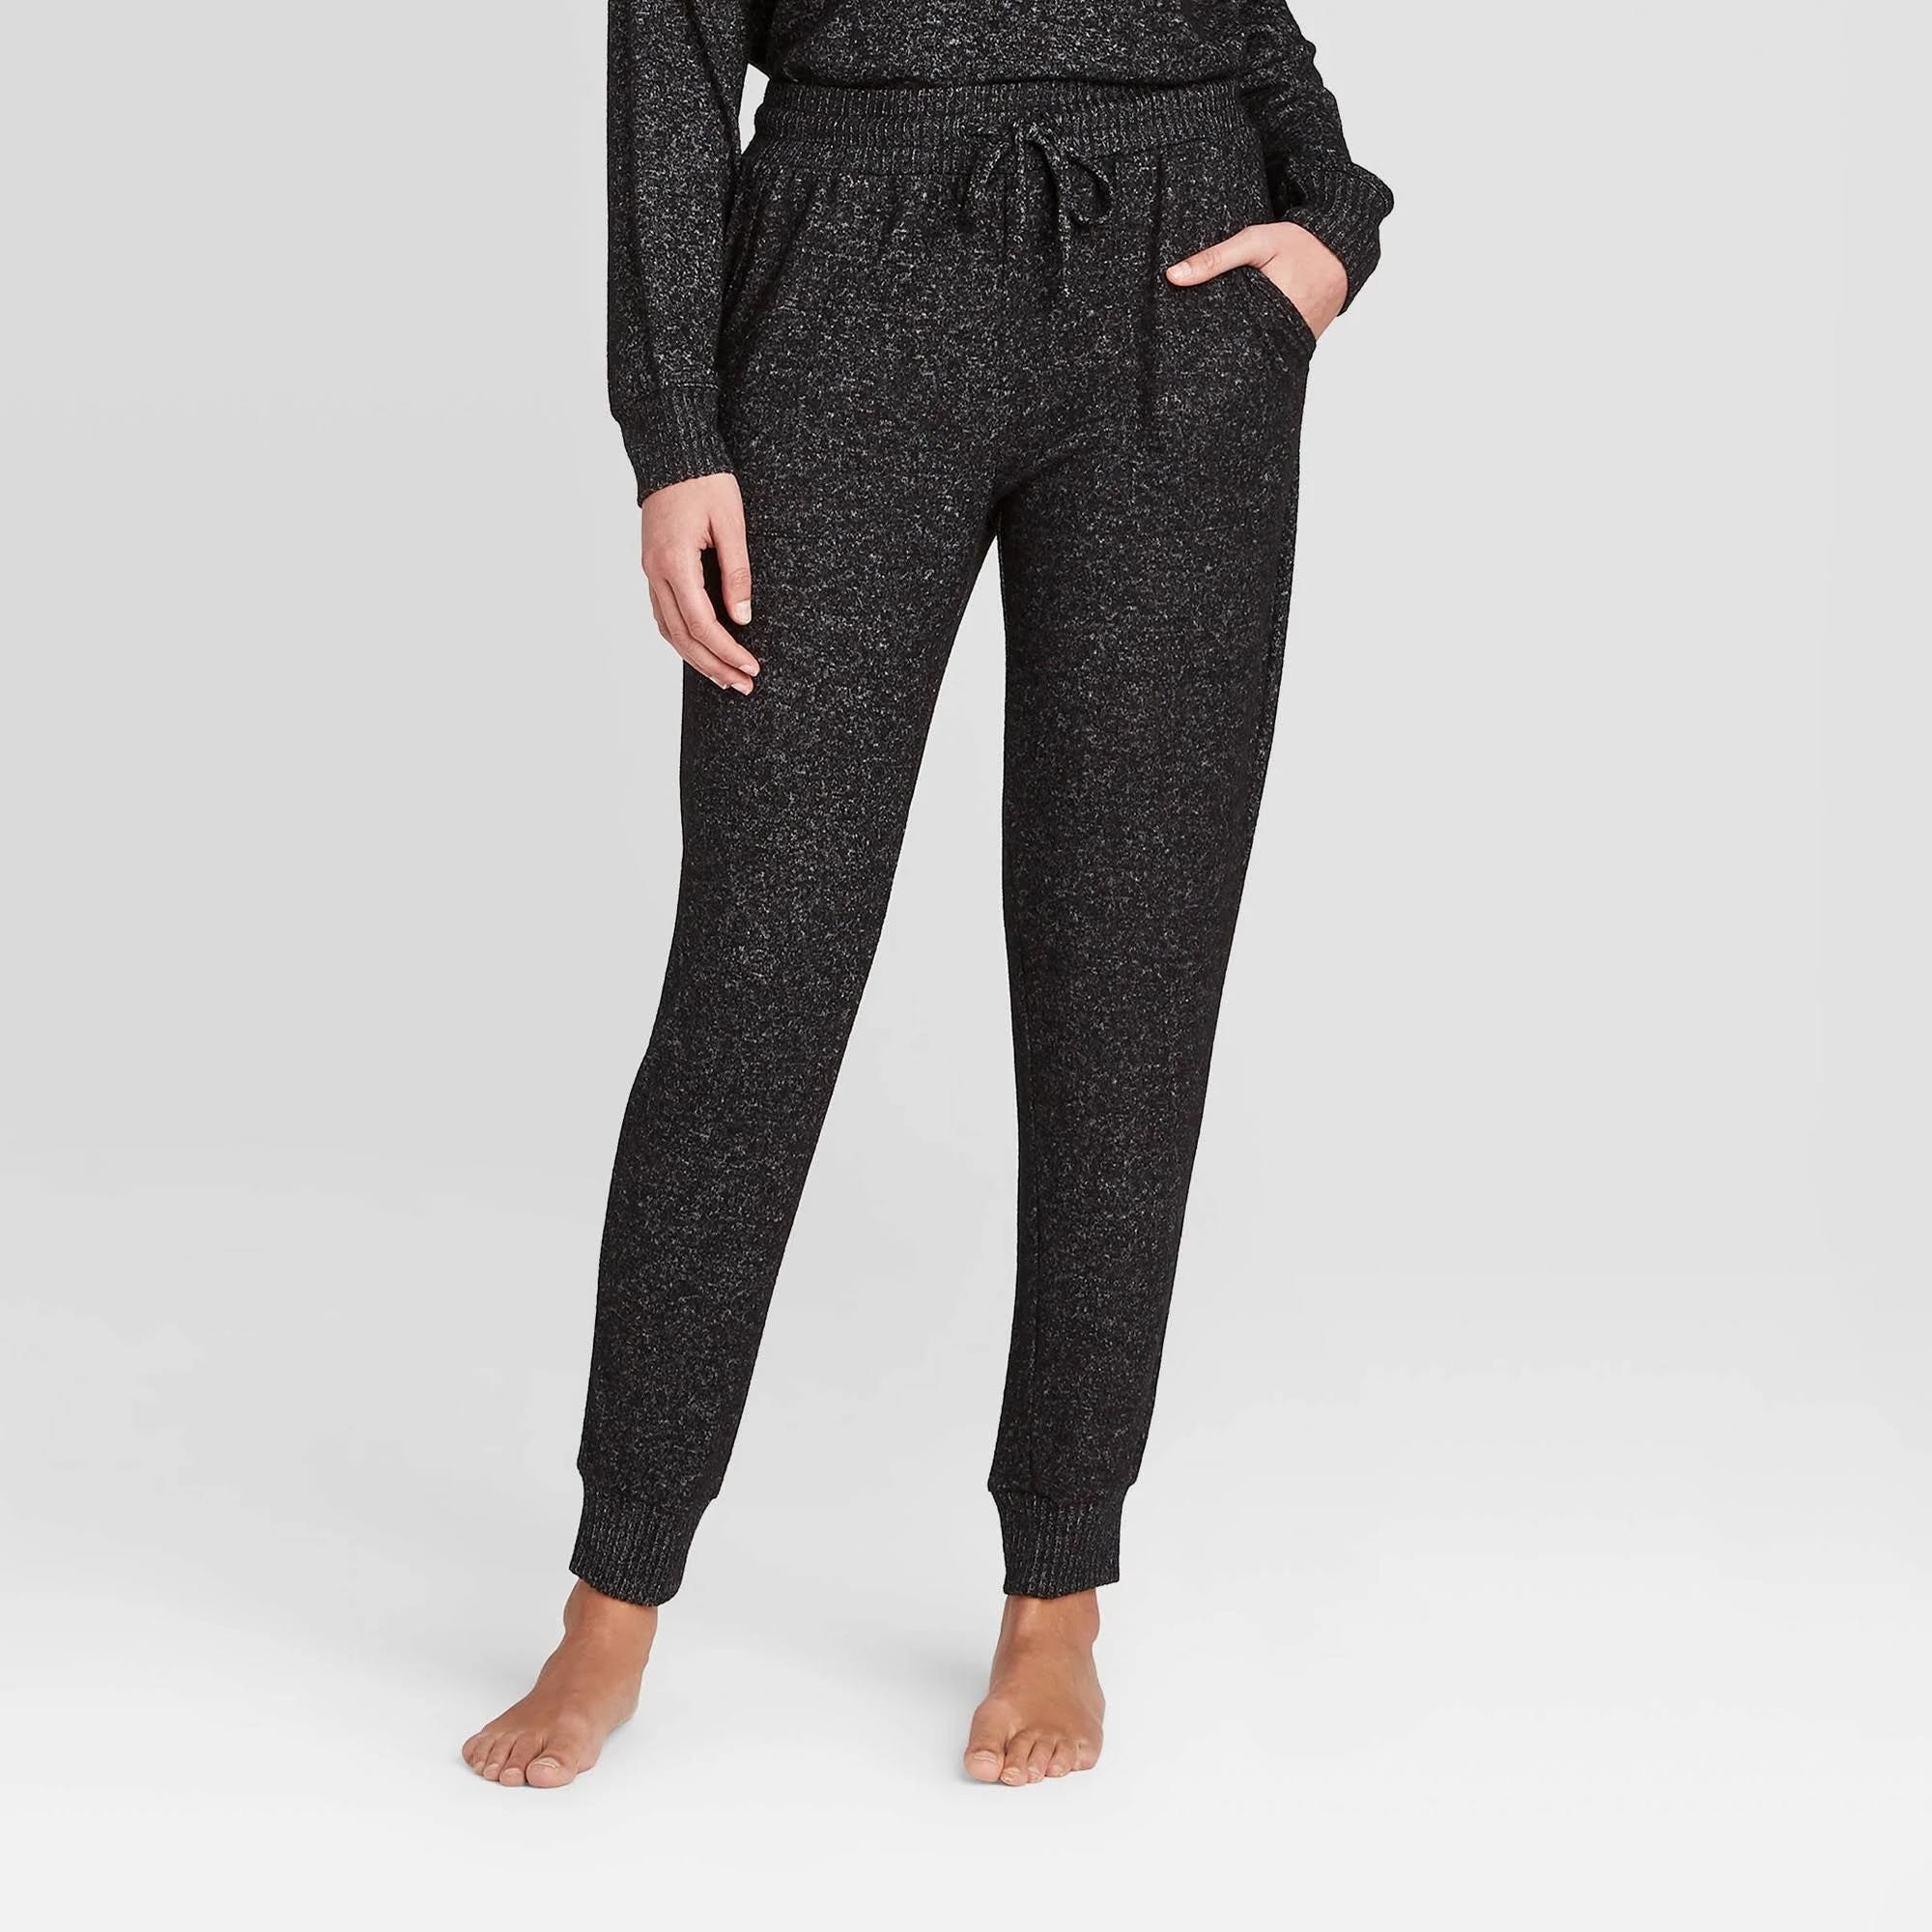 Comfy Lounge Pants: Perfectly Cozy Stars Above Dark Gray | Image